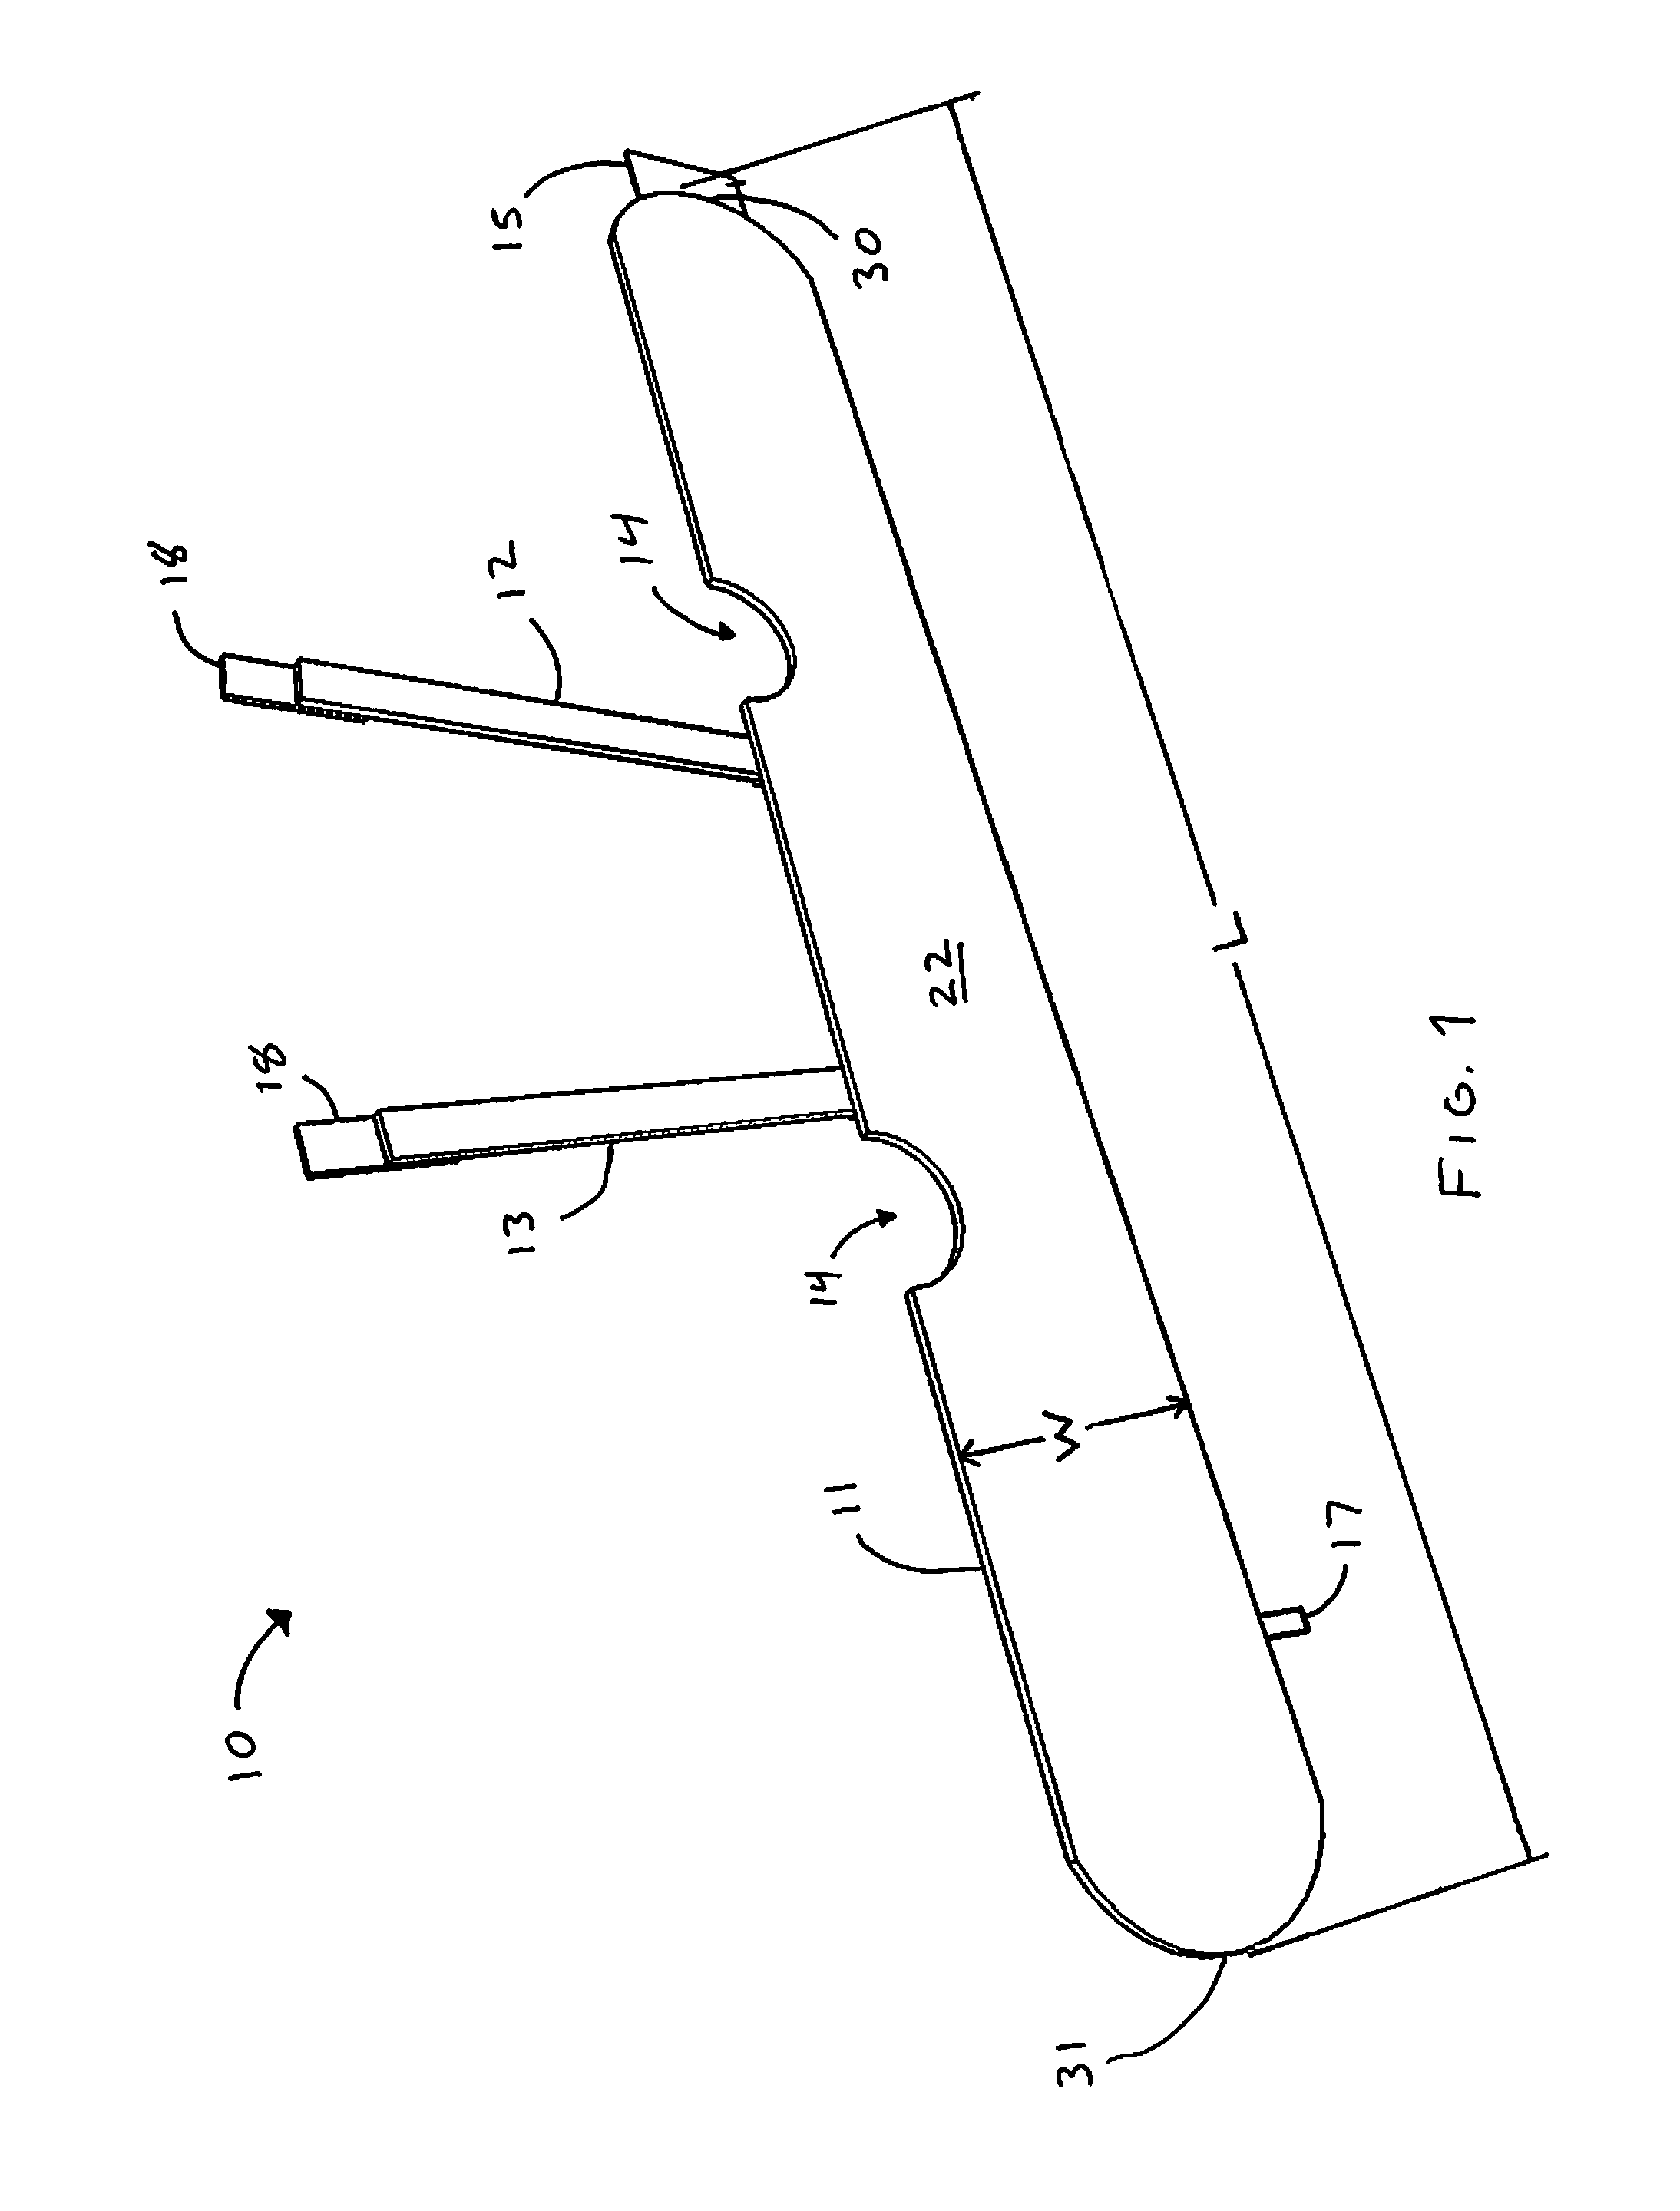 Device and methods for accessory chest muscle development